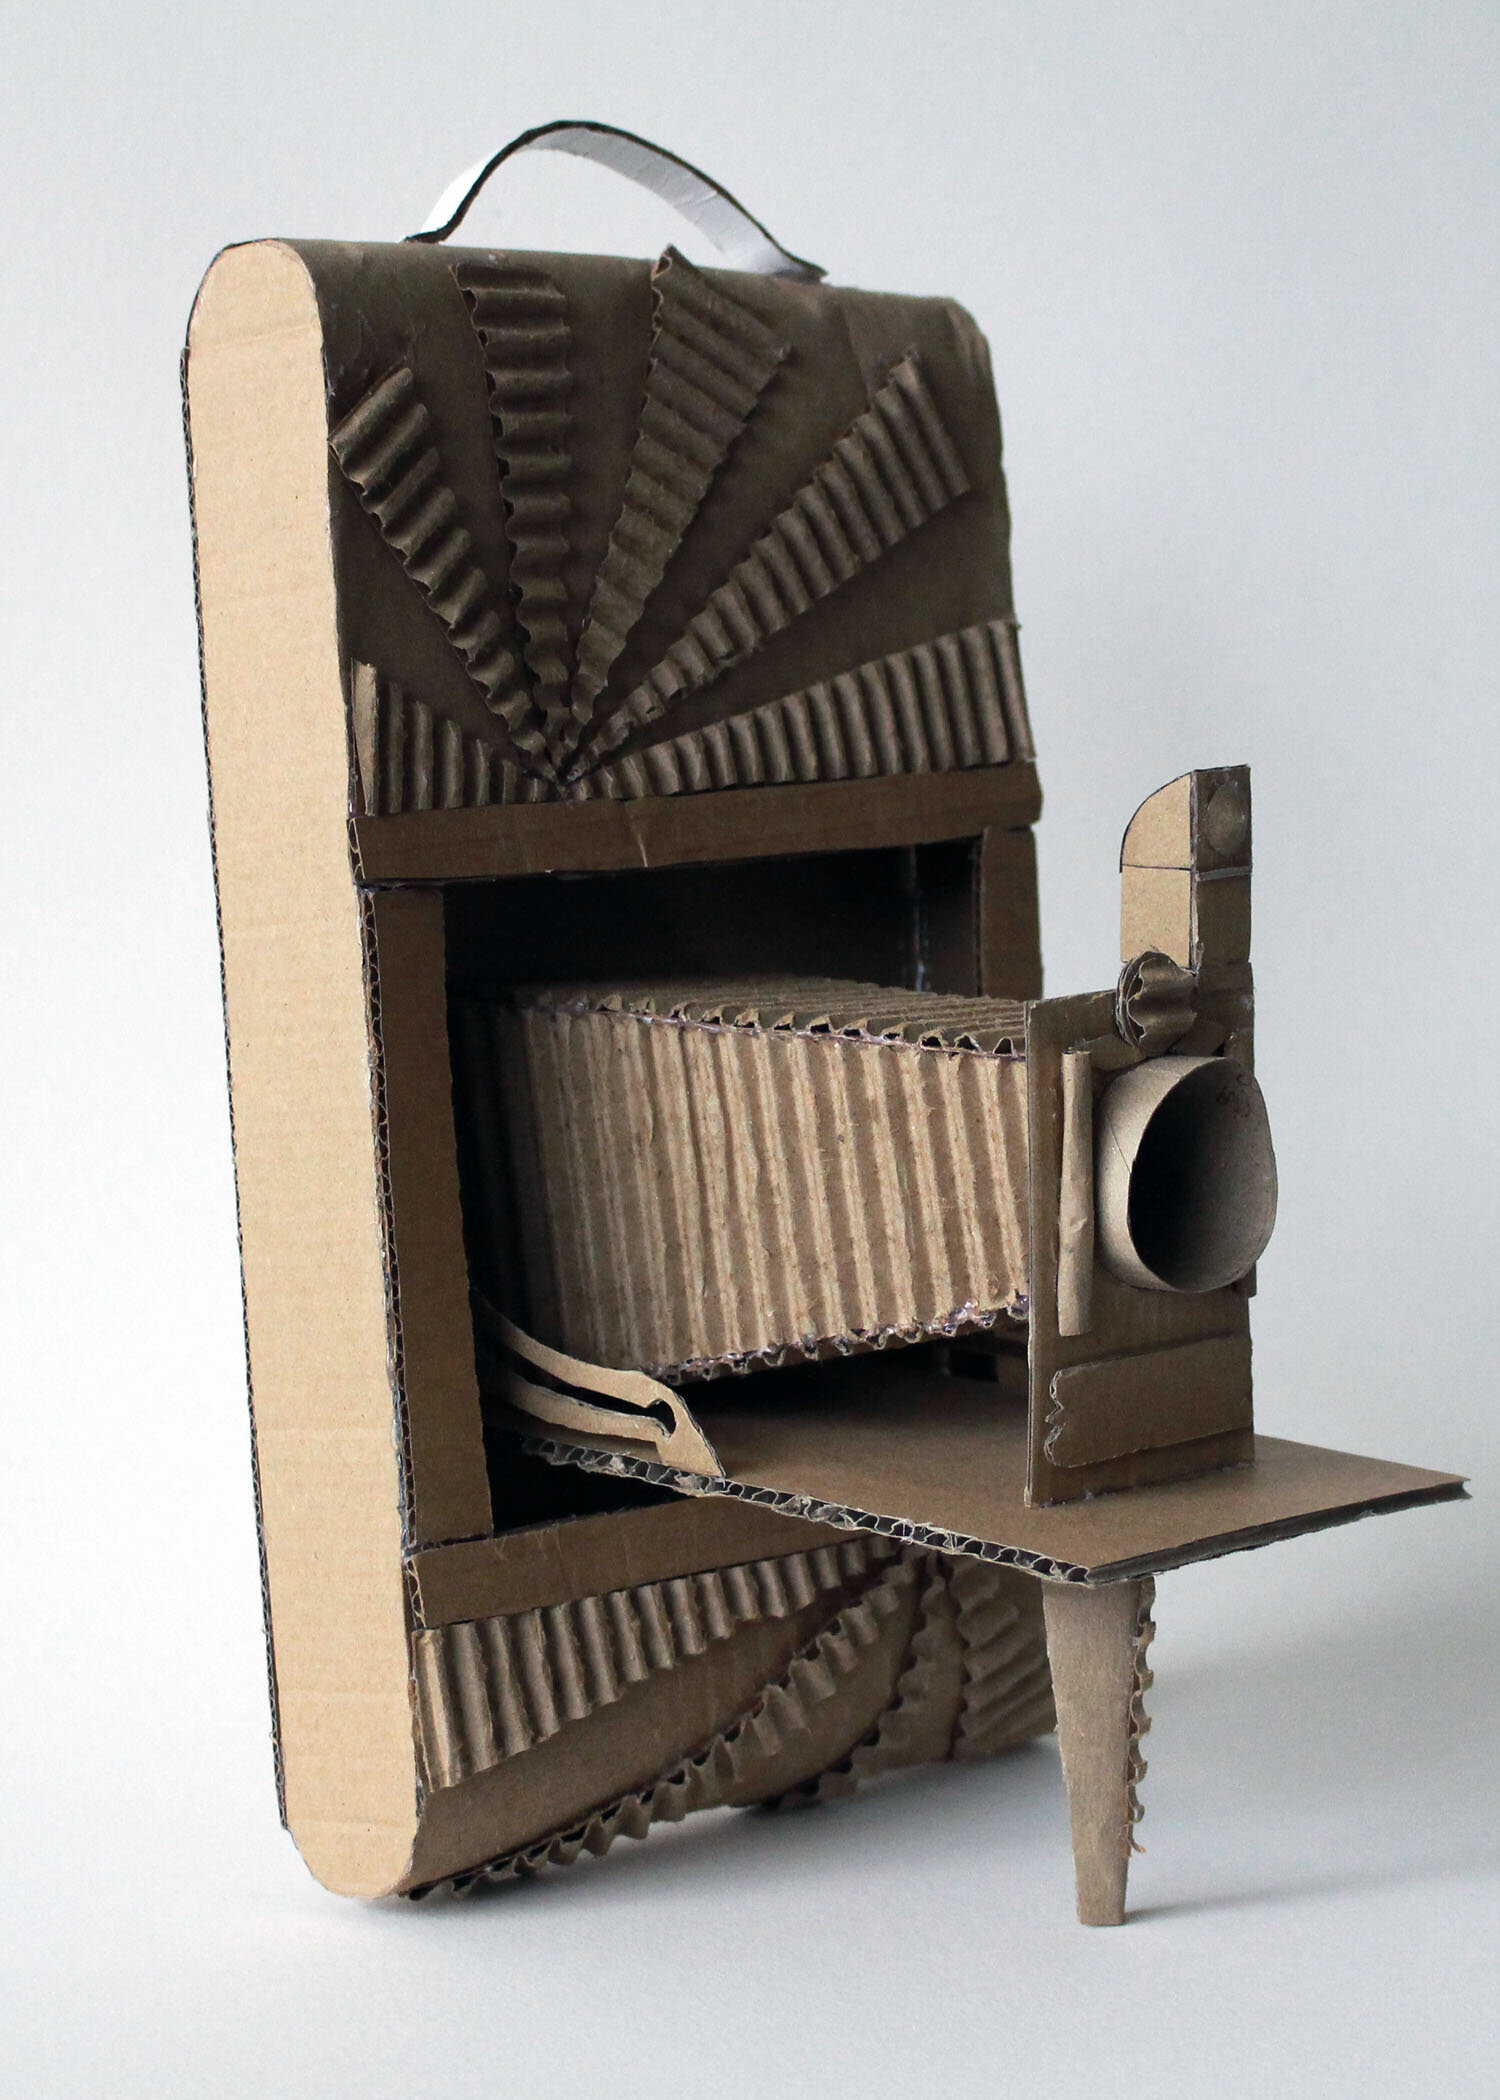  Taline Norsigian,  Cardboard Sculptures.  Cardboard, hot glue, 10 by 8 by 4 inches. Kingswood Oxford, Fall 2016, Intro to Studio Art.  